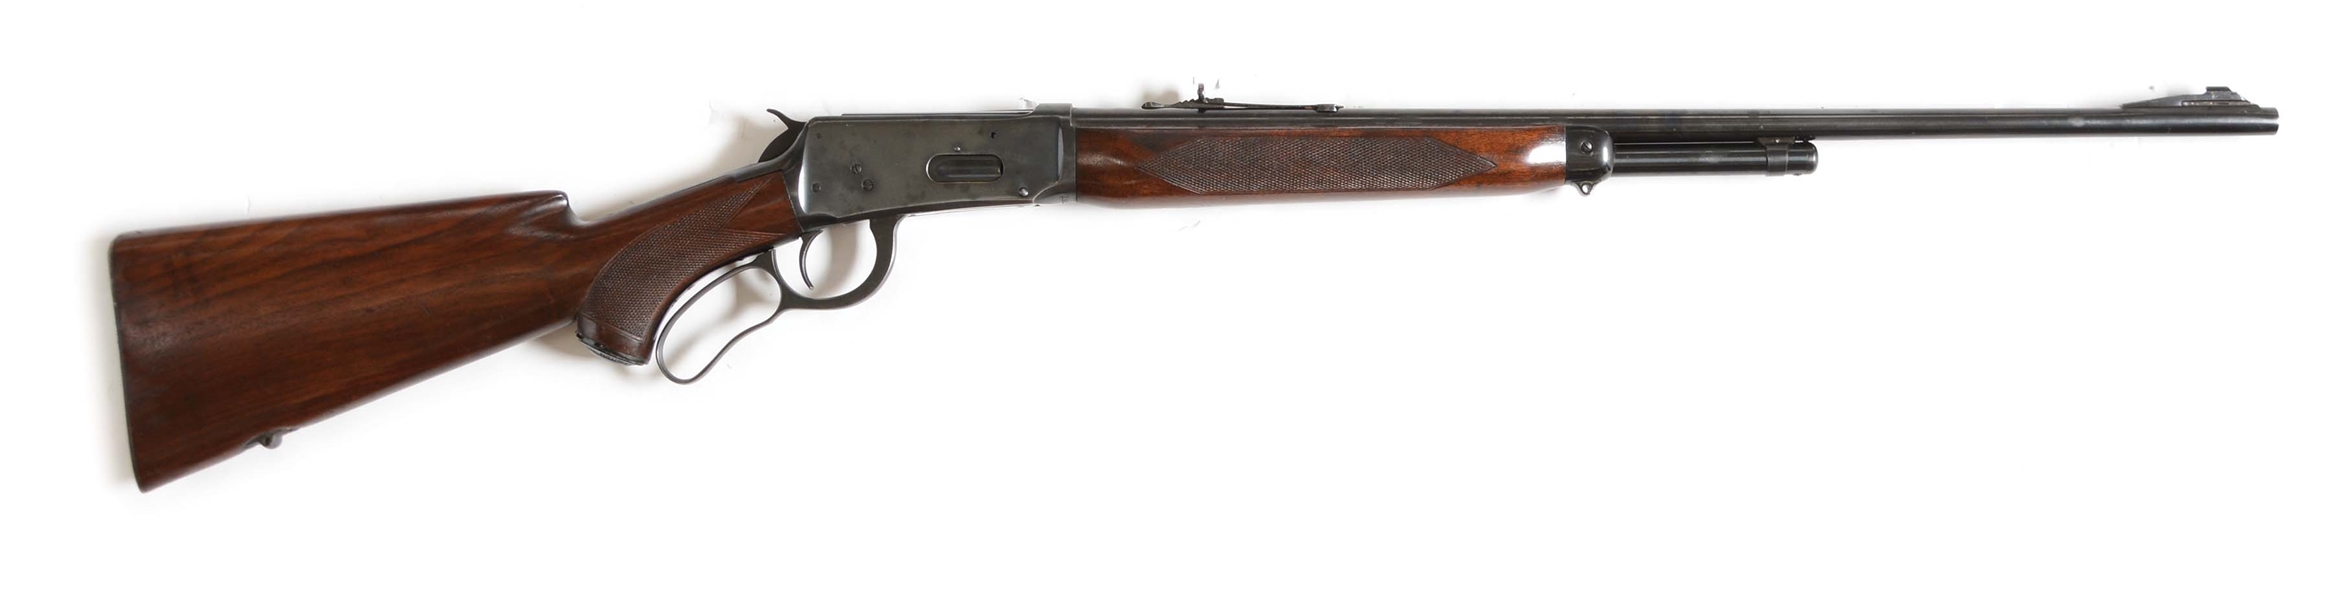 (C) WINCHESTER 64 DELUXE LEVER ACTION RIFE (1952).